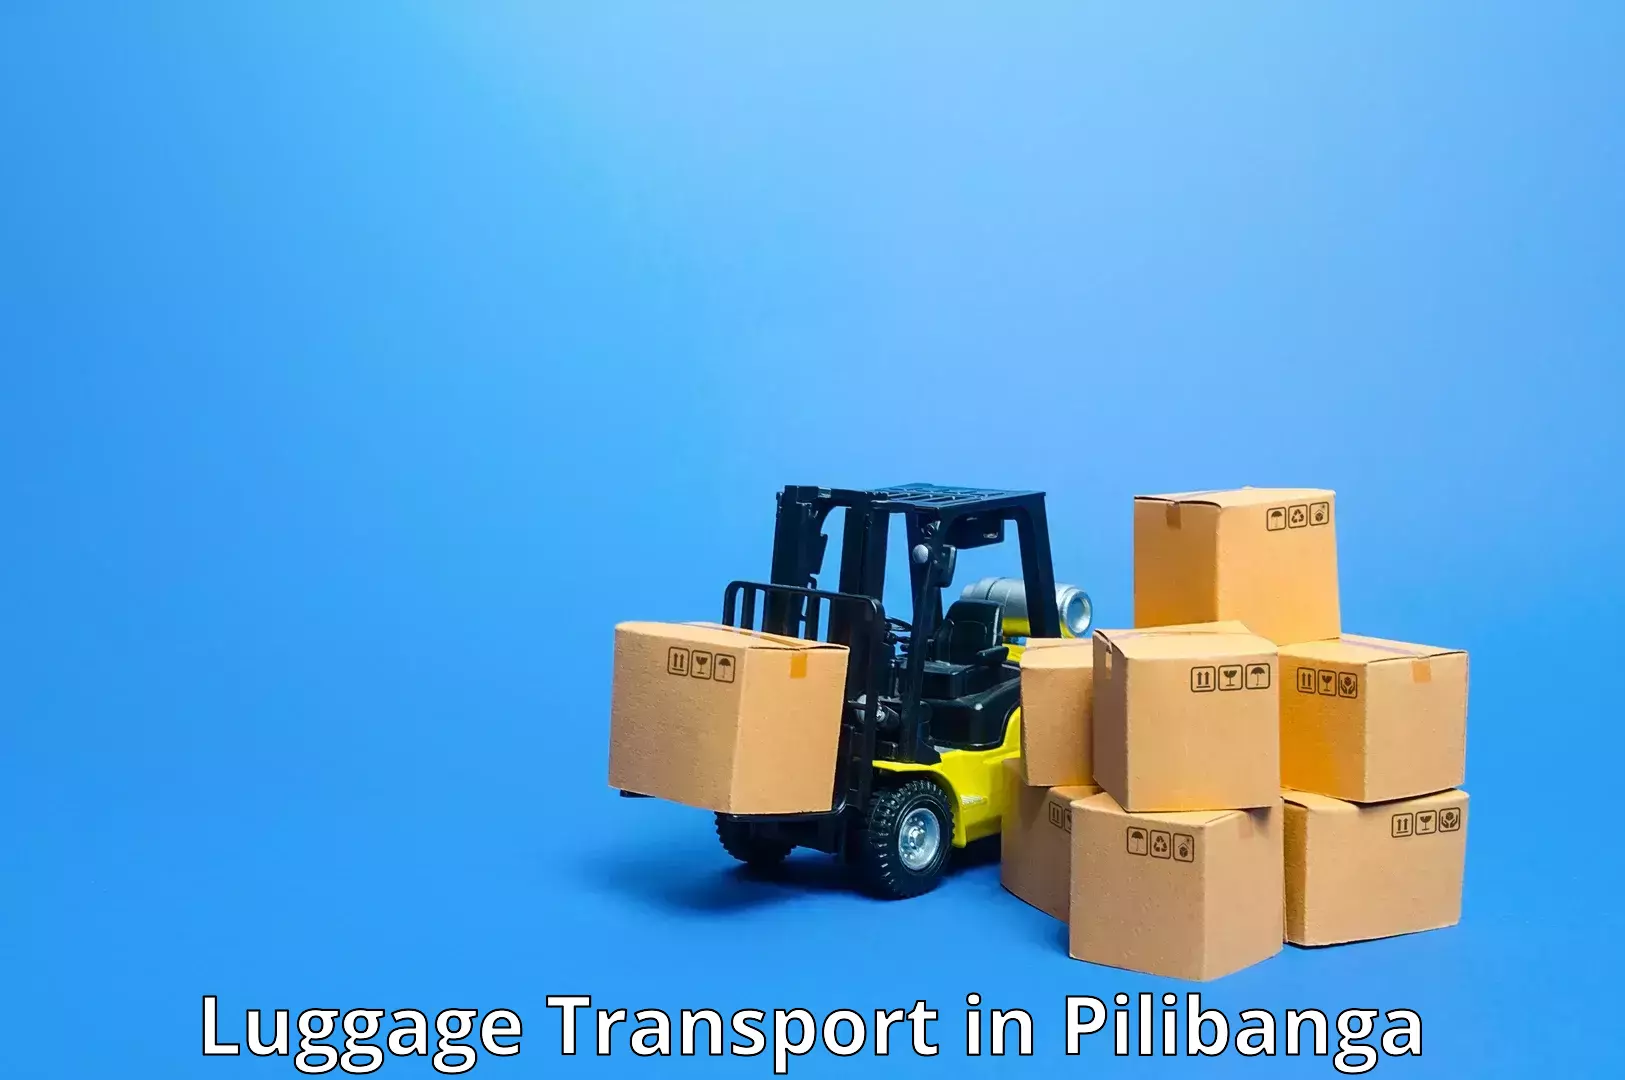 Luggage delivery system in Pilibanga